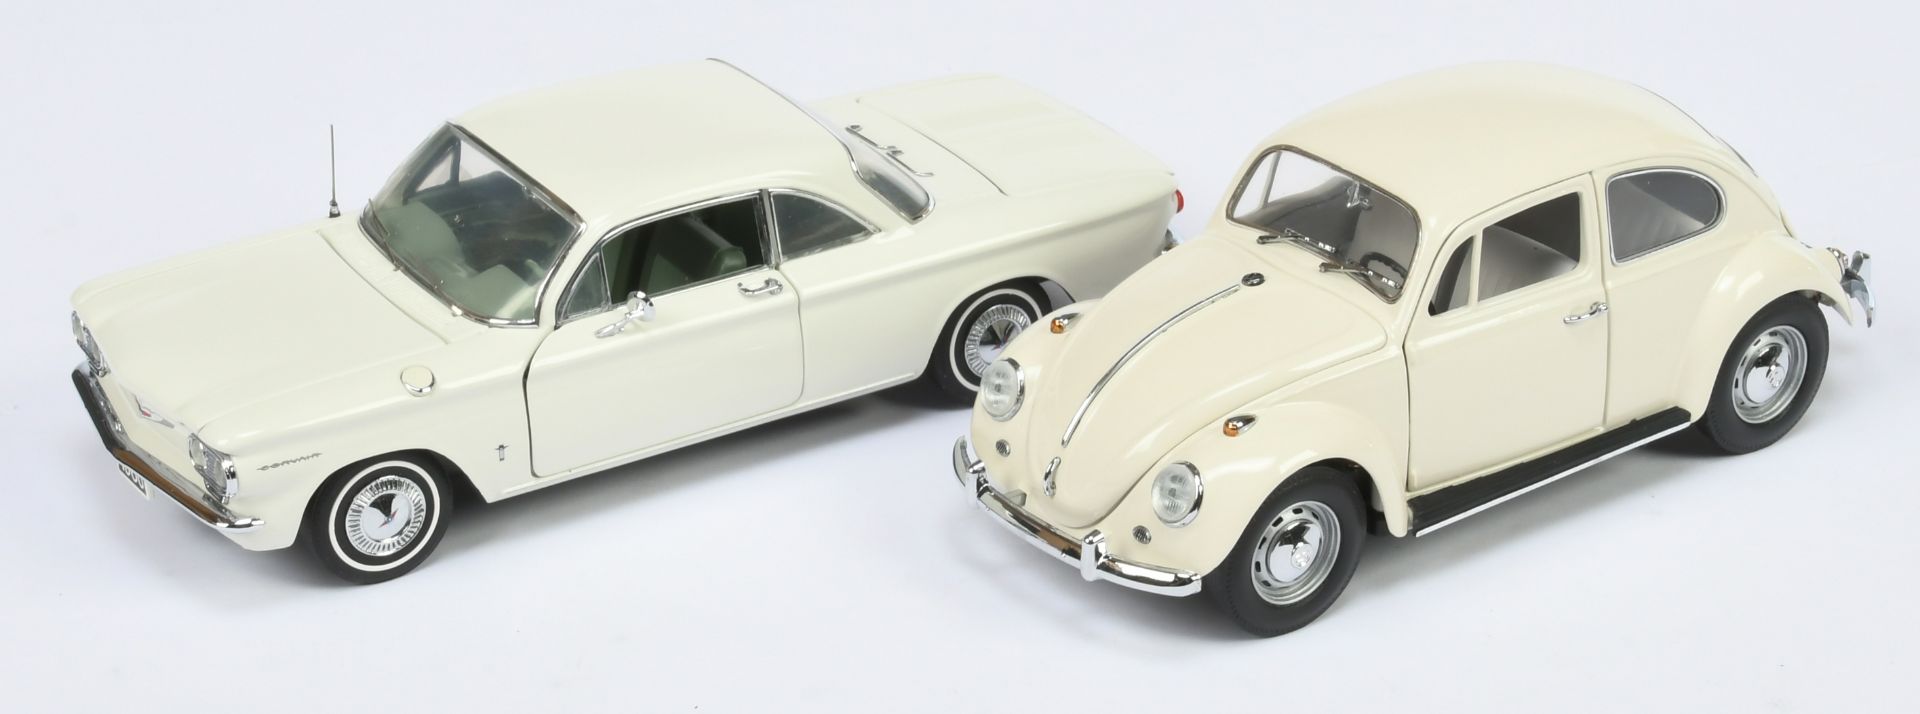 Franklin Mint 1/24th scale pair (1) B11VE12 1960 Corvair Monza club coupe, (2) B11TD00 1967 VW Be...